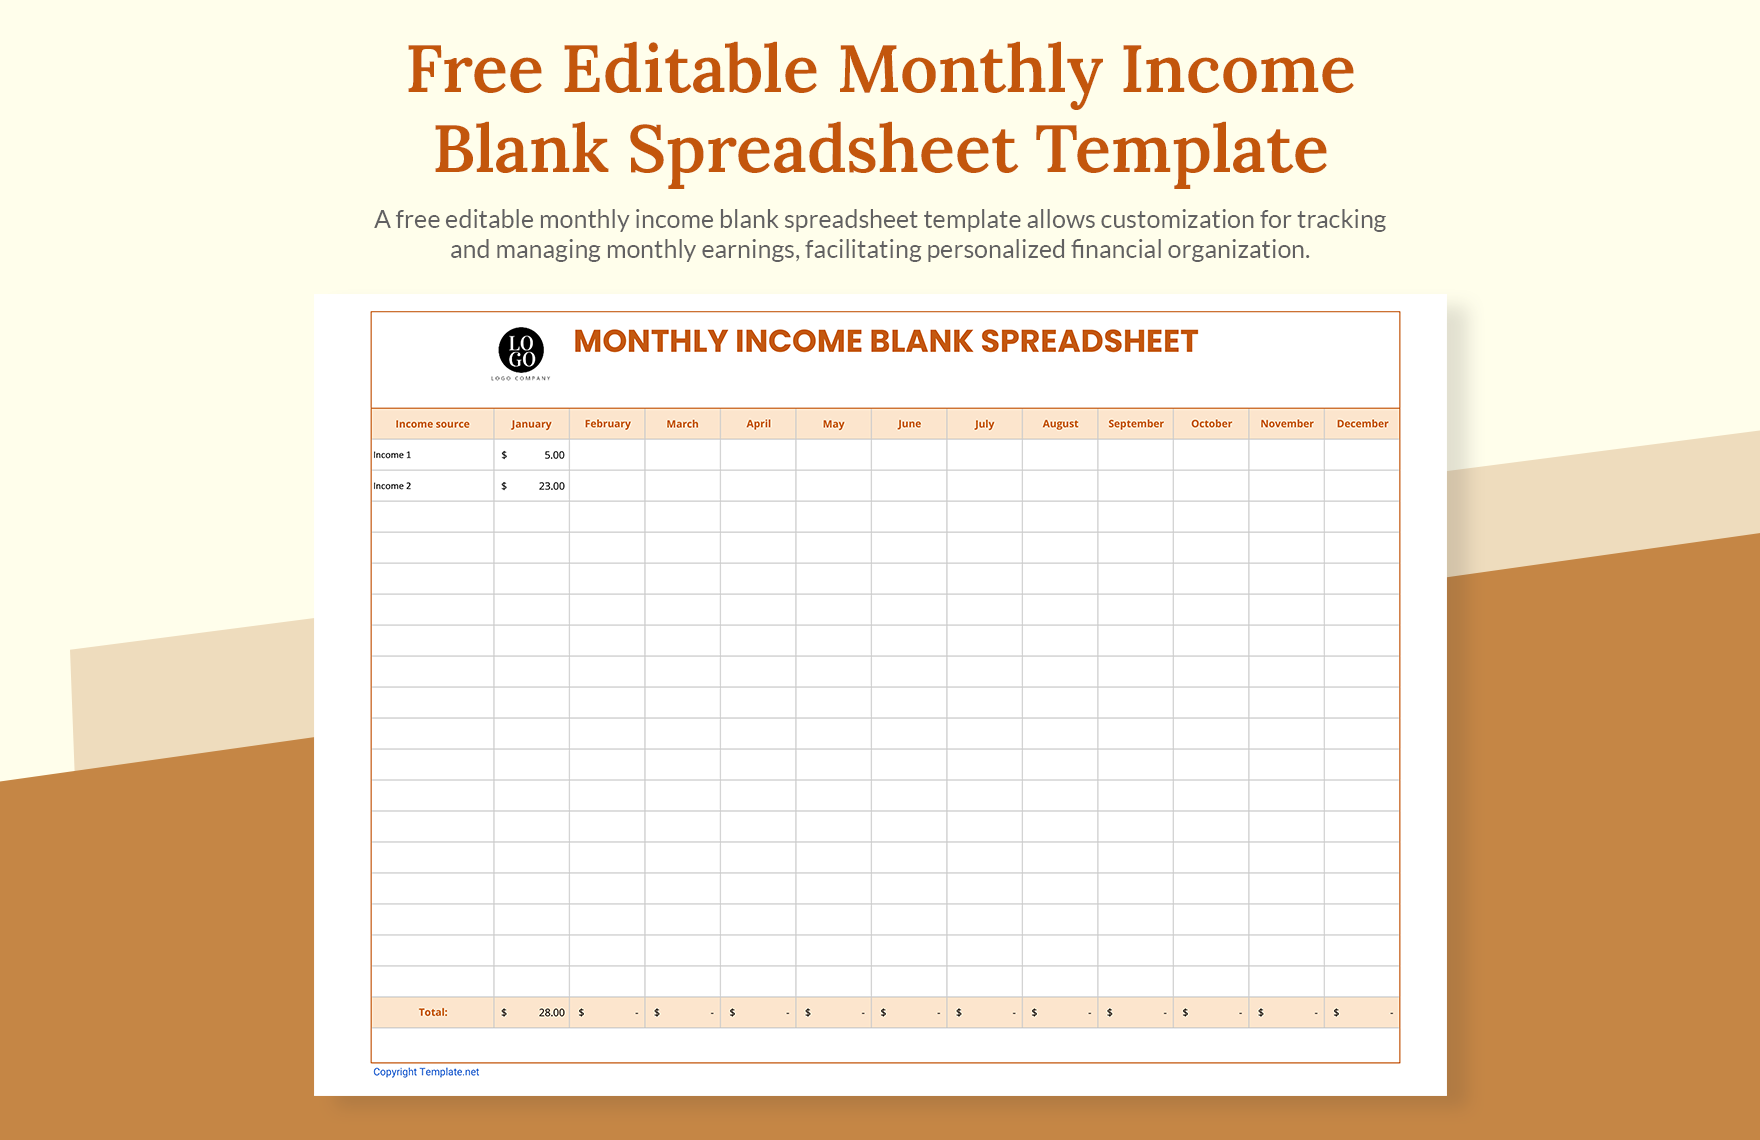 Editable Monthly Income Blank Spreadsheet Template